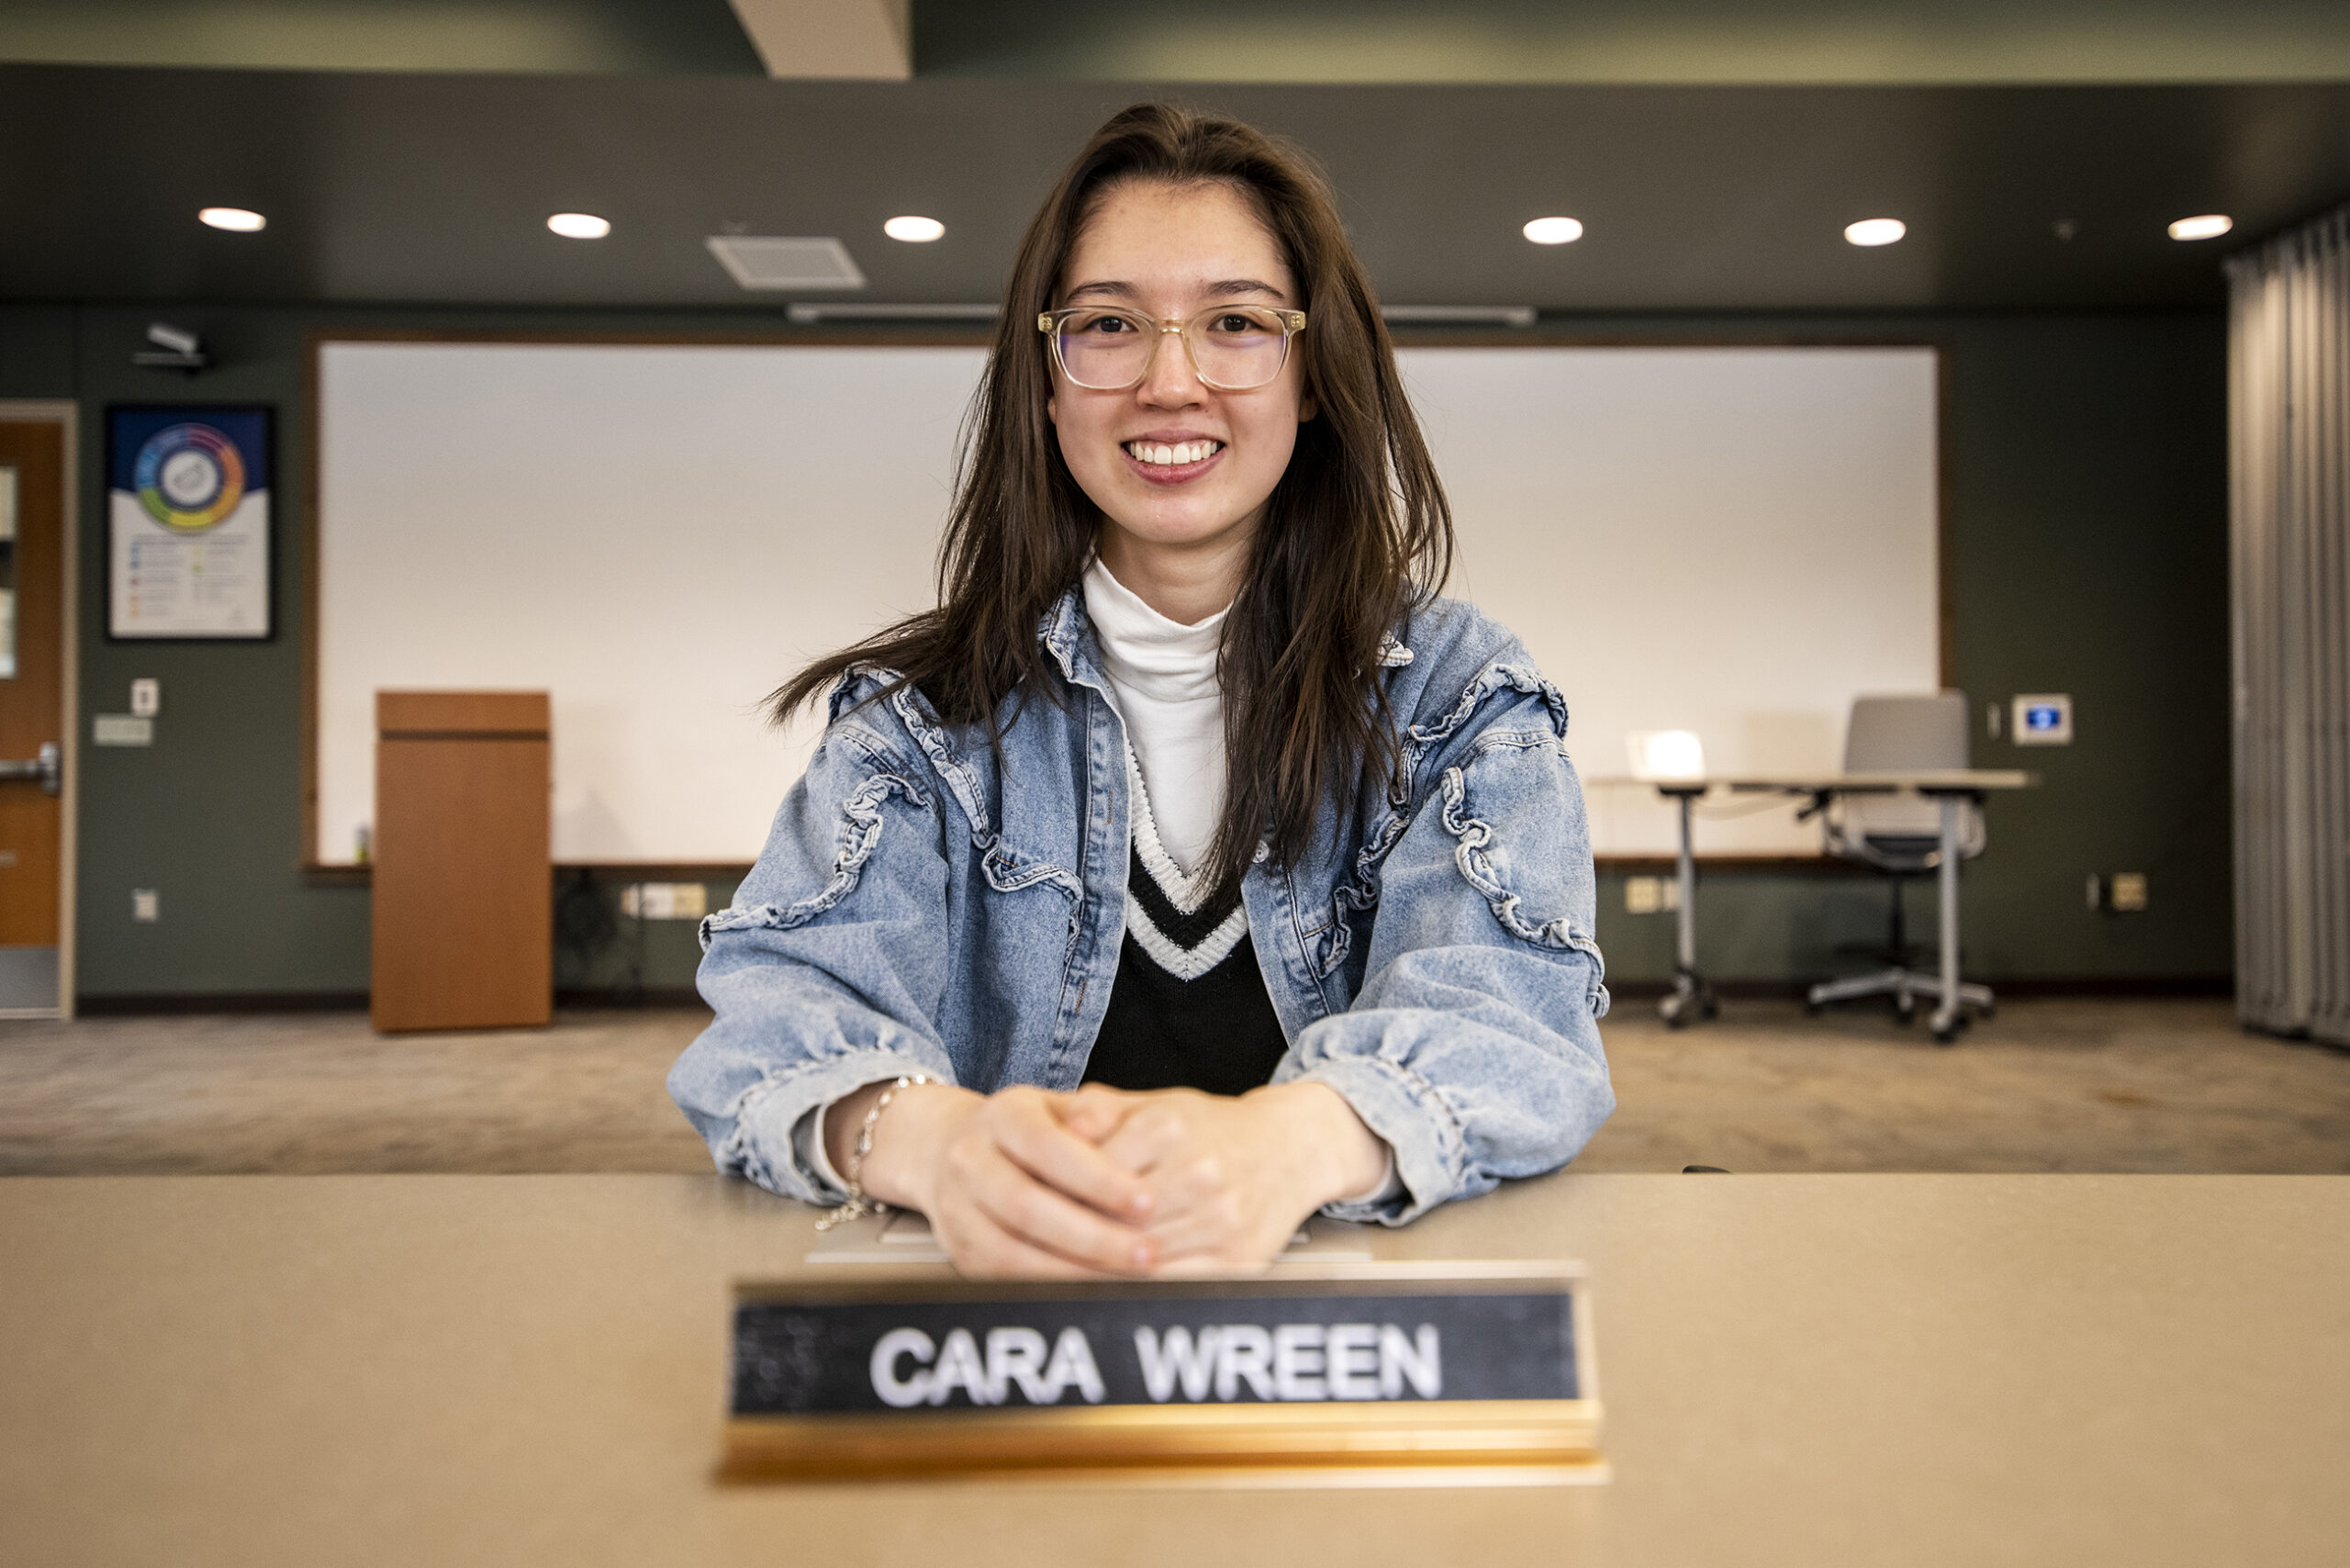 A student sits at a table in a conference room with a name plate.